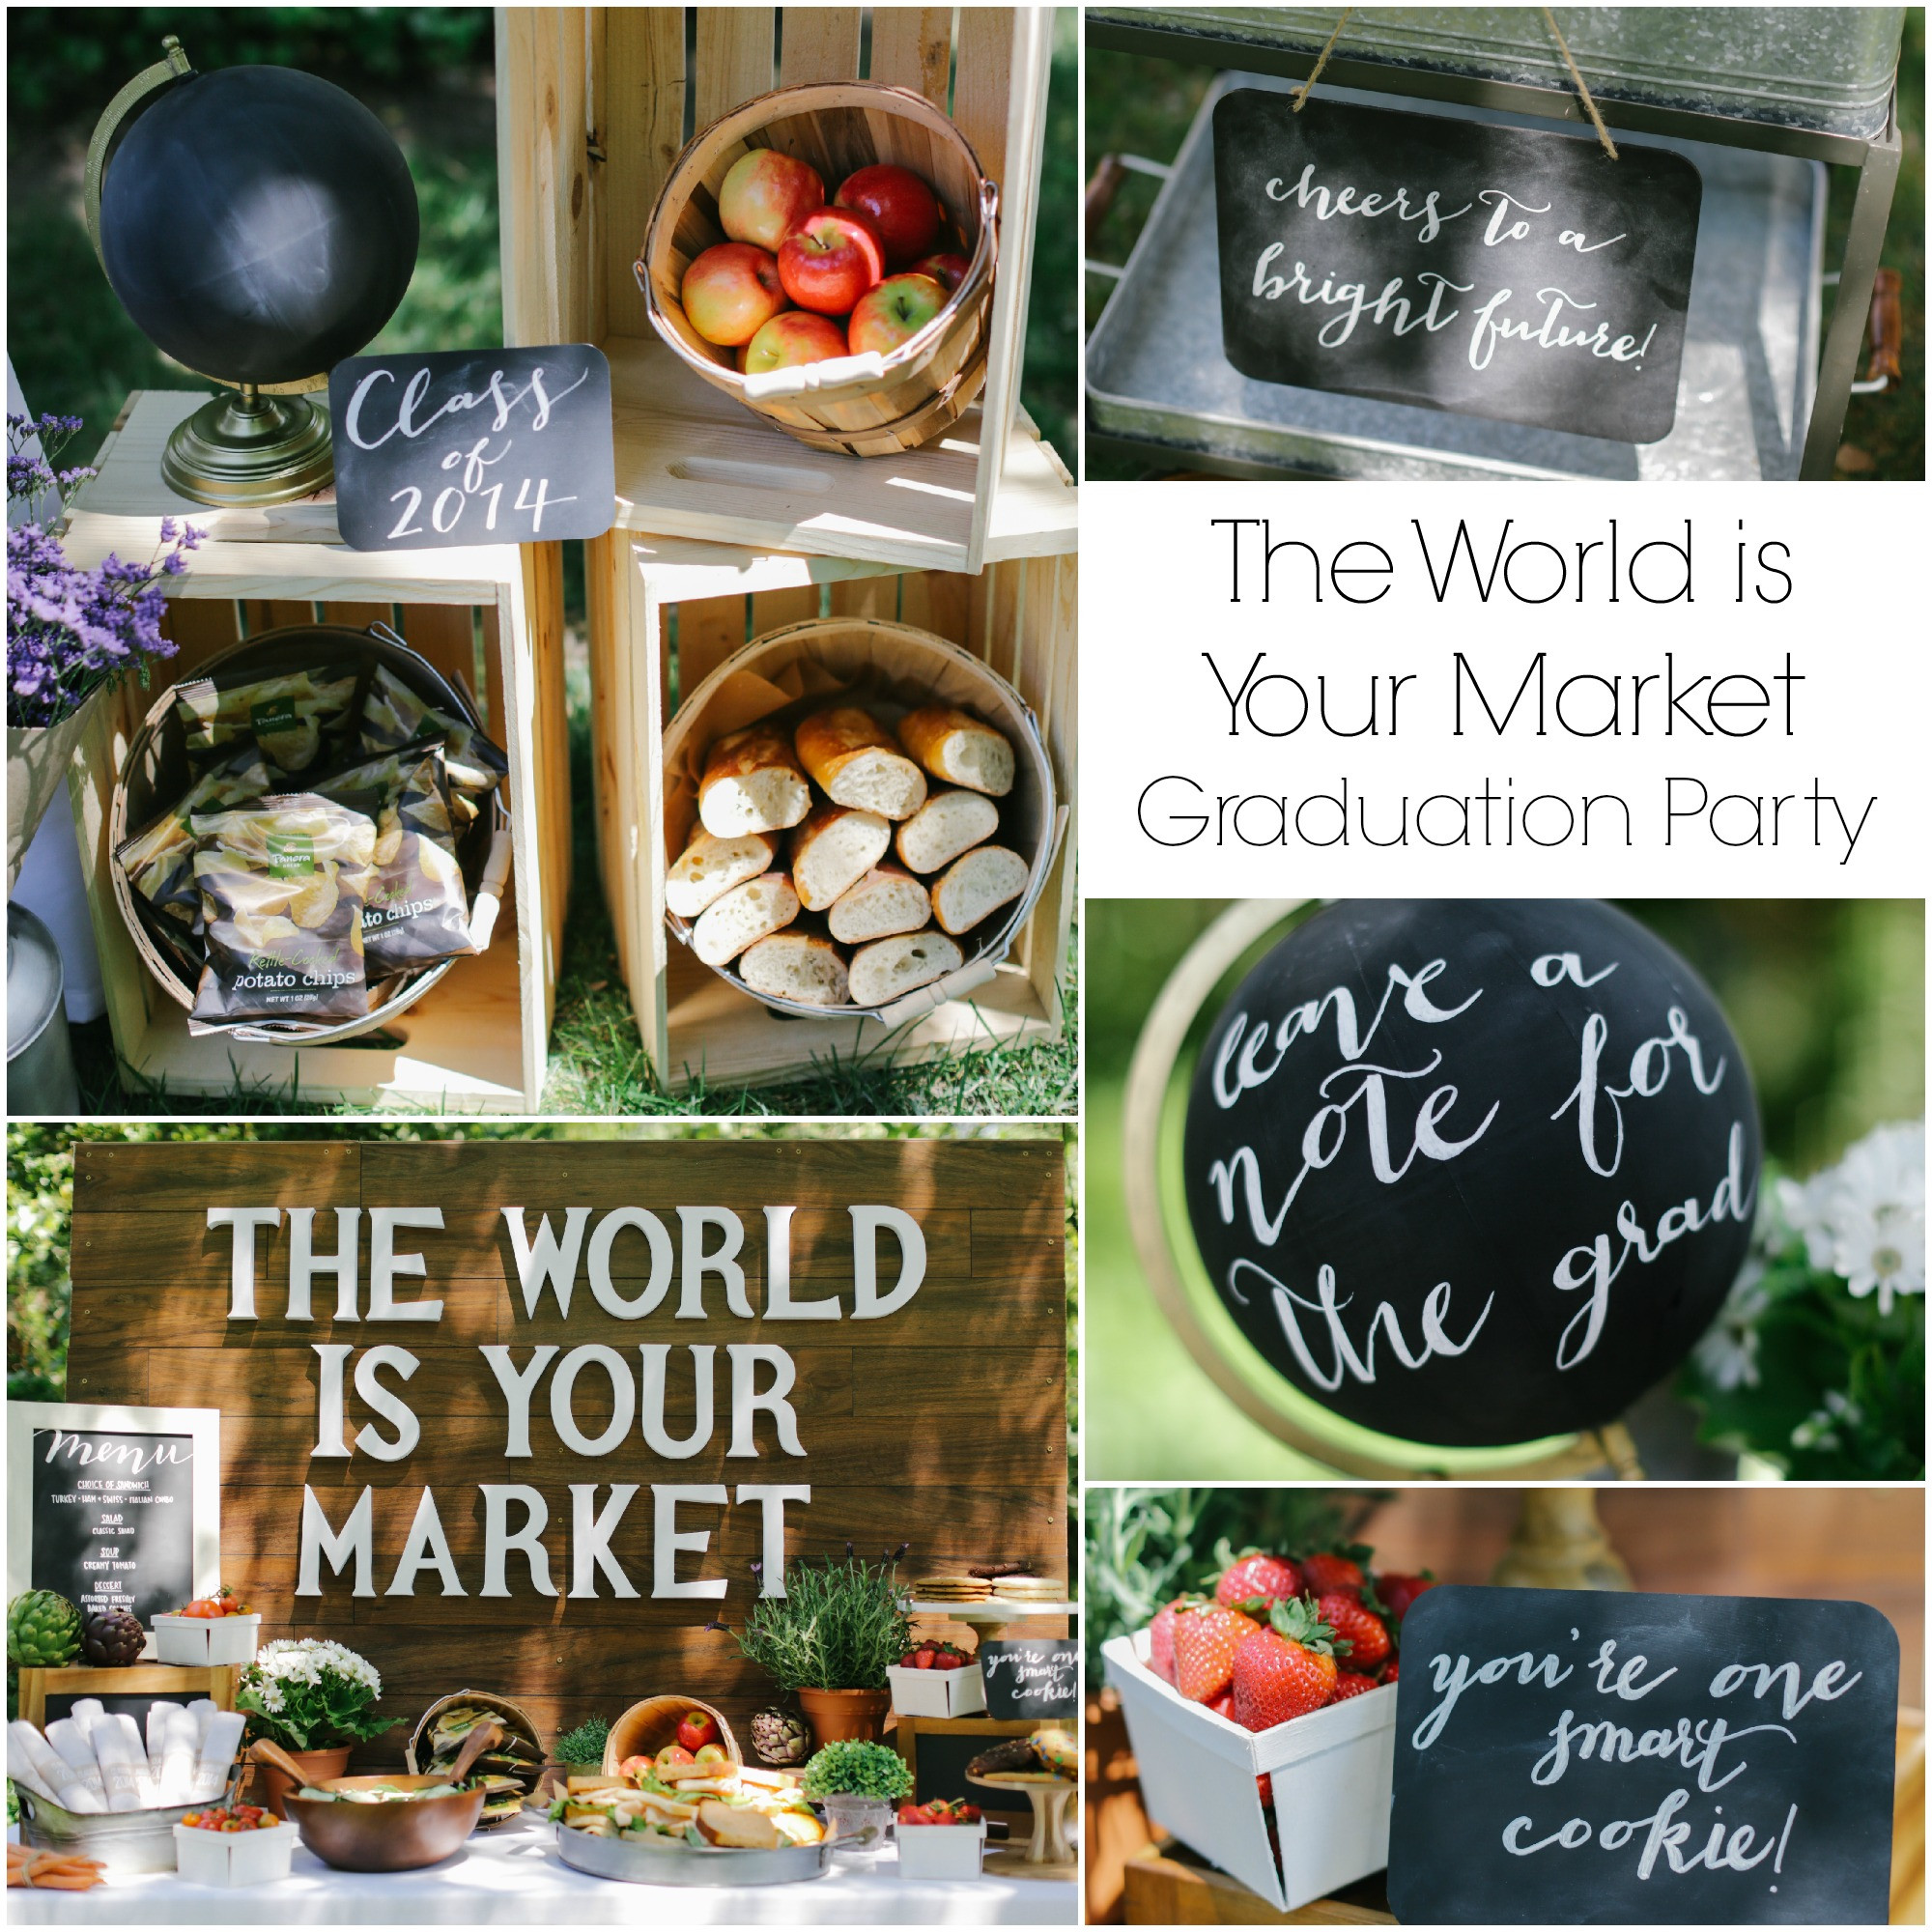 Catering Ideas For Graduation Party party The World is Your Market Graduation Party Ideas